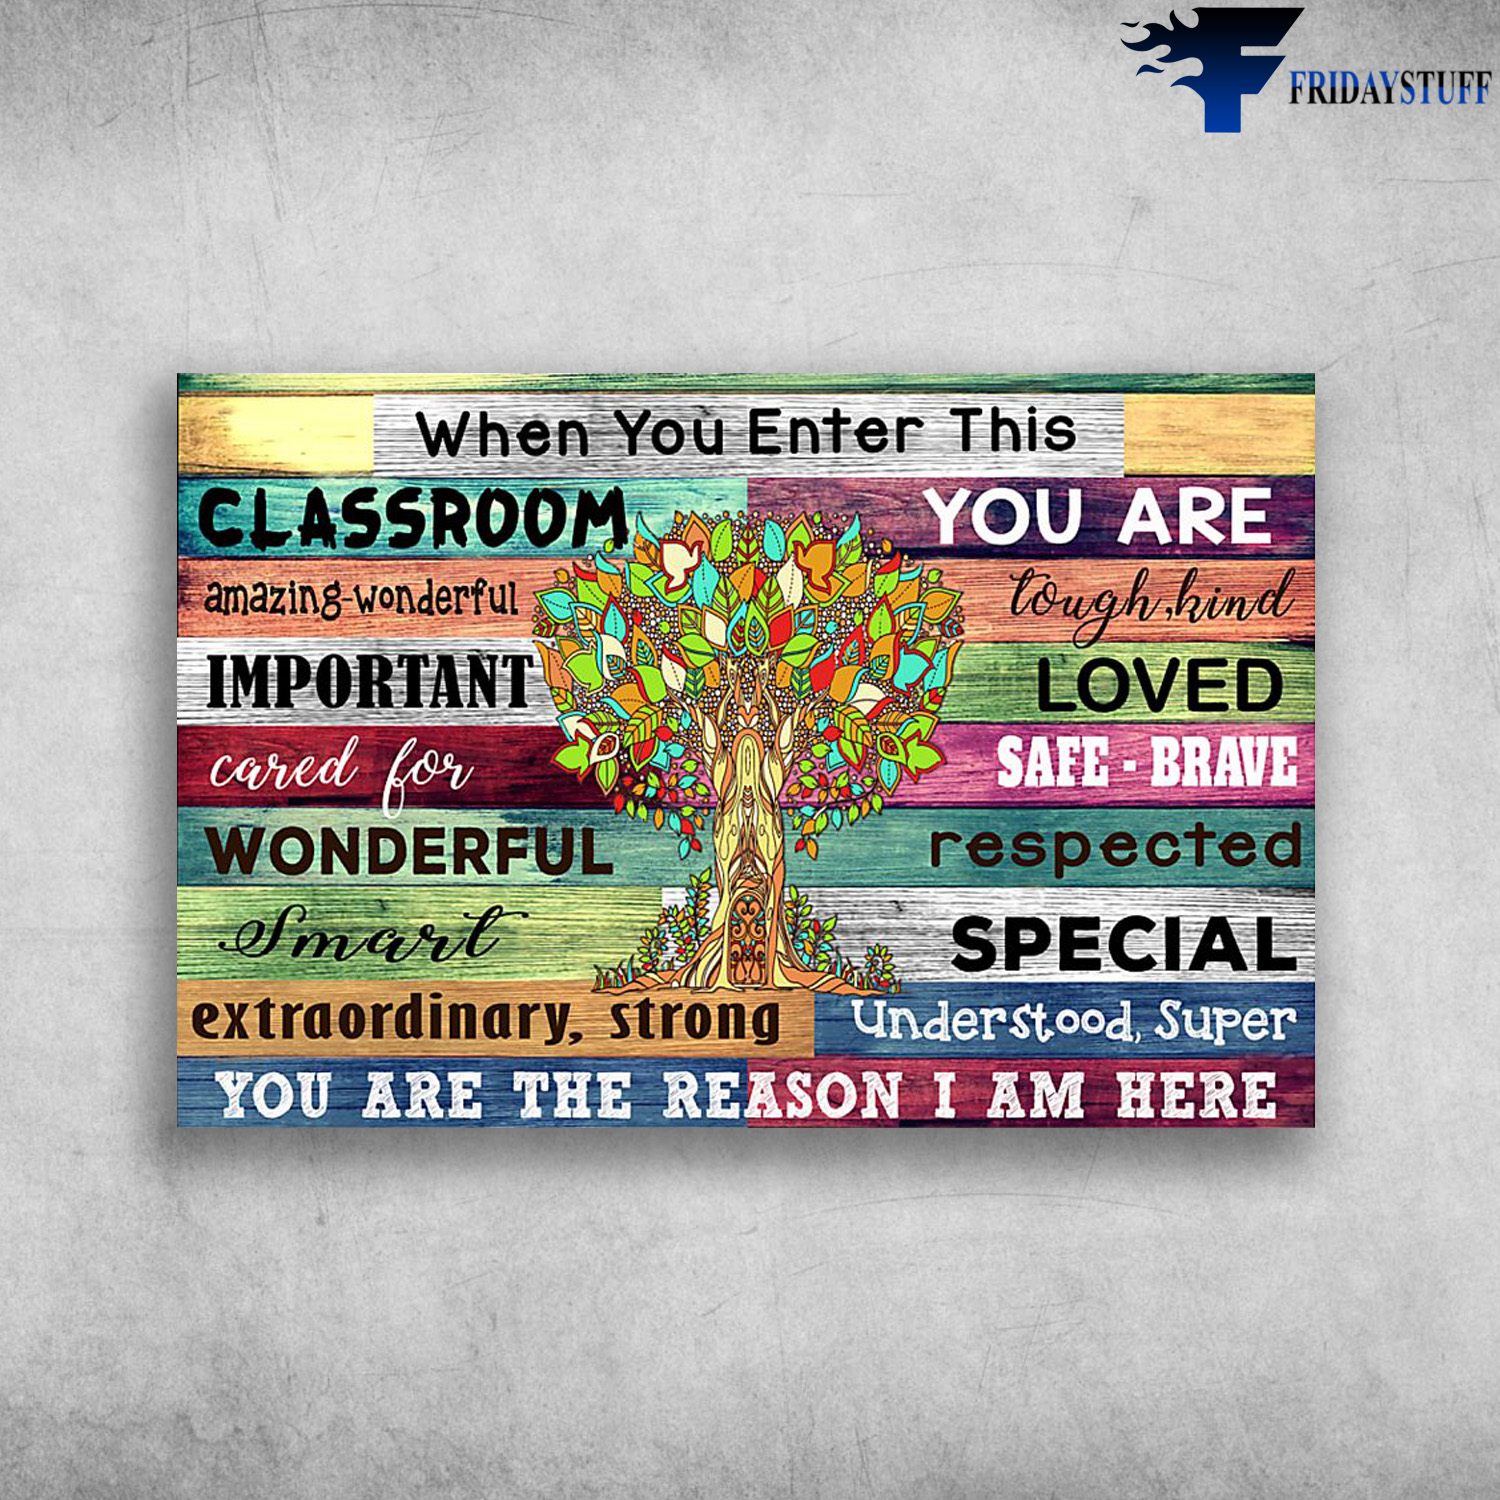 Classroom - When You Enter This Classroom, You Are Amazing, Wonderful, Tough, Kind, Important, Loved, Cared For Wonderful, Smart, You Are The Reason I Am Here